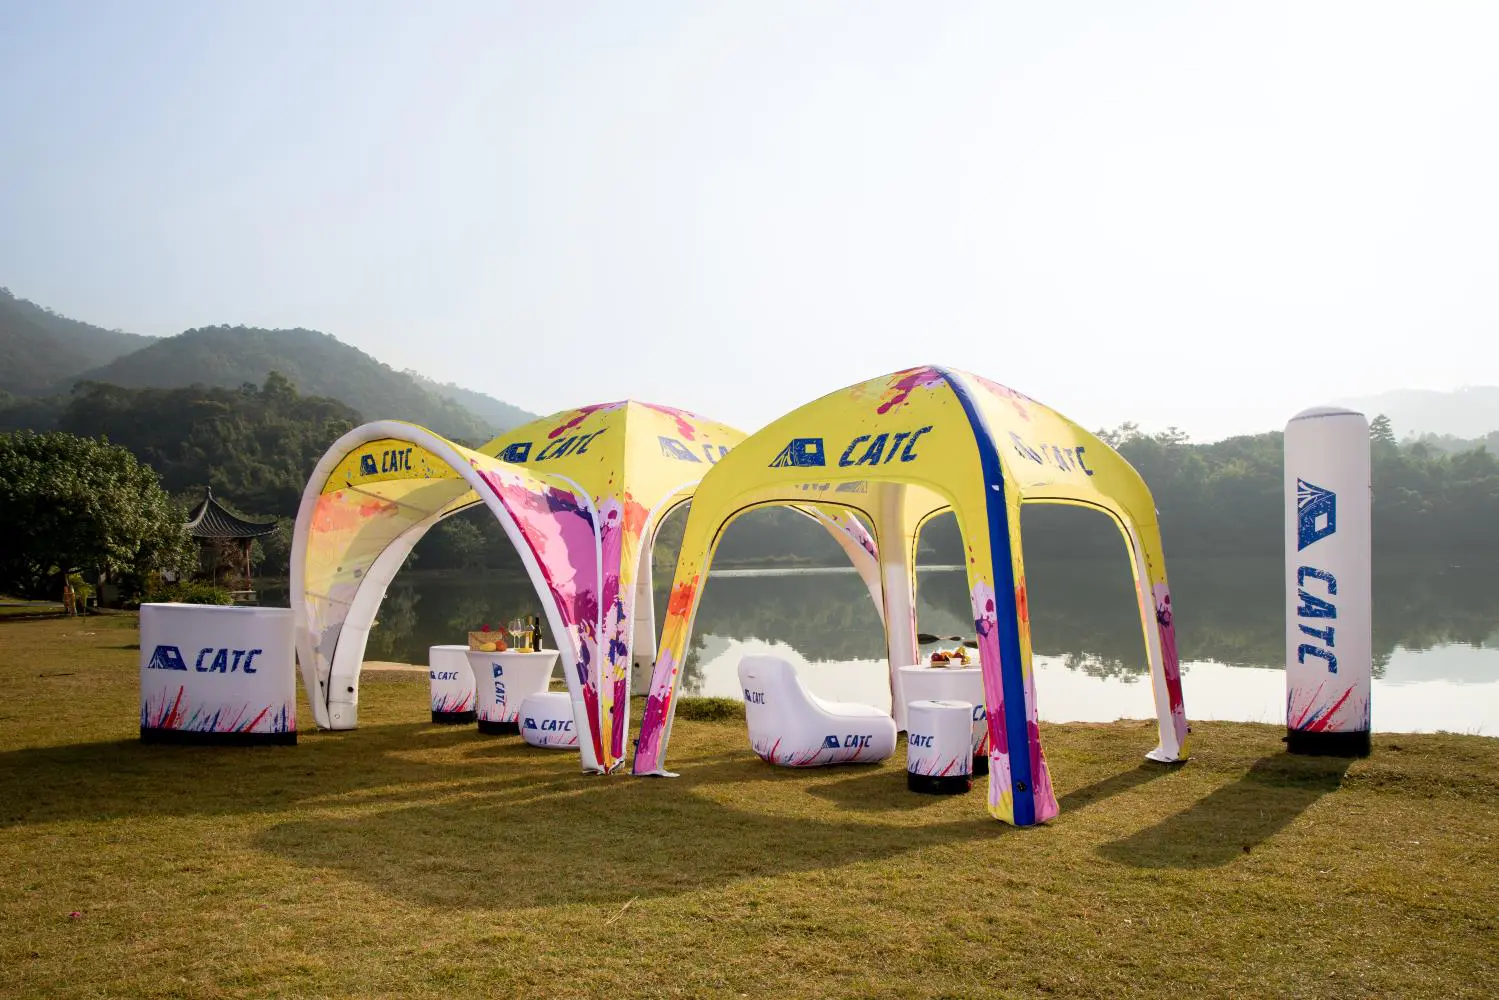 Promotional Tent 